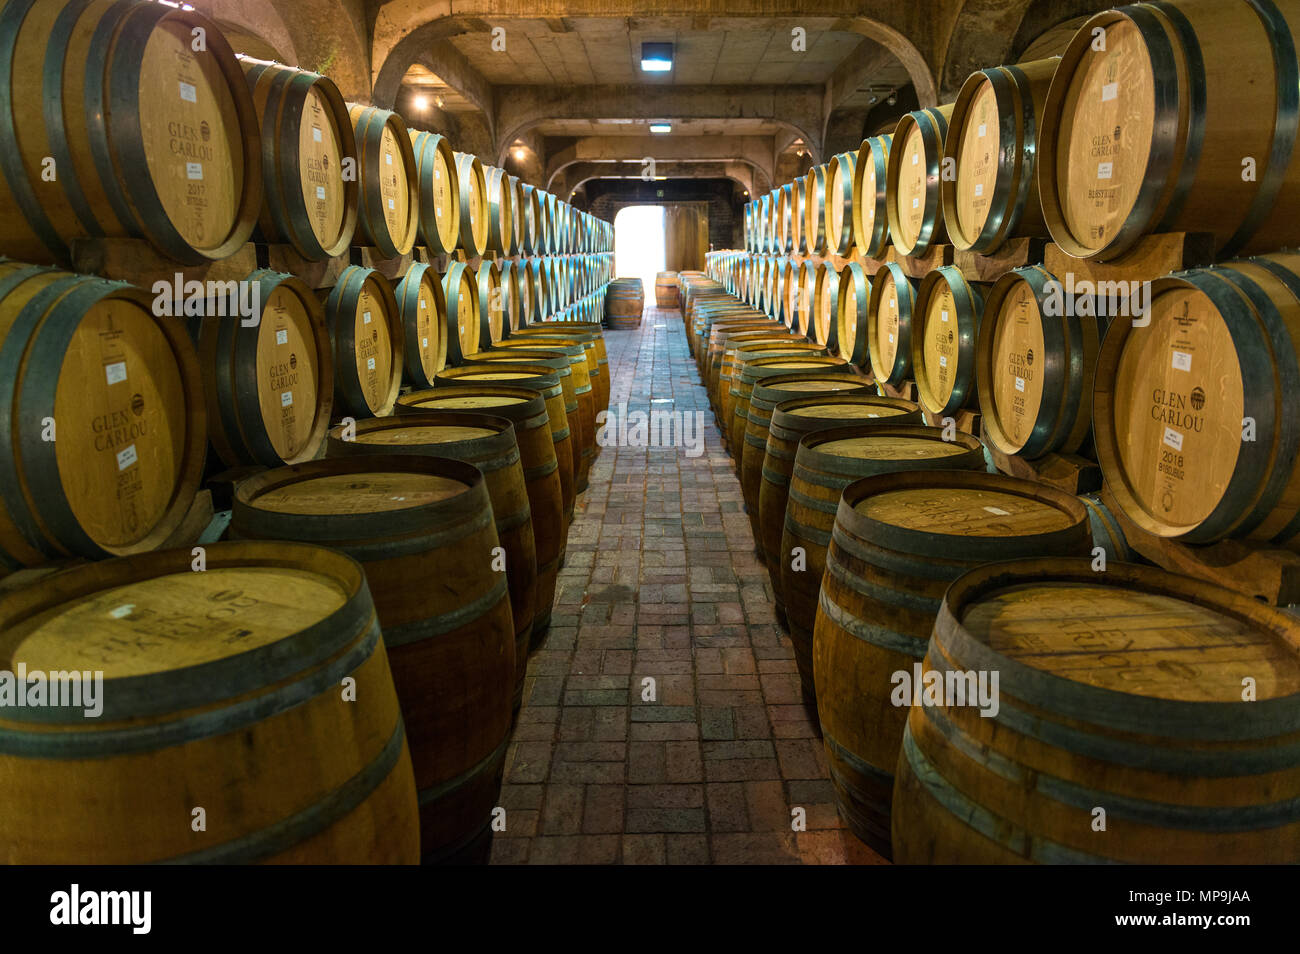 Wine aging in oak wooden casks in the cellar of a winery with vineyard, located between Stellenbosch and Cape Town, South Africa. Stock Photo